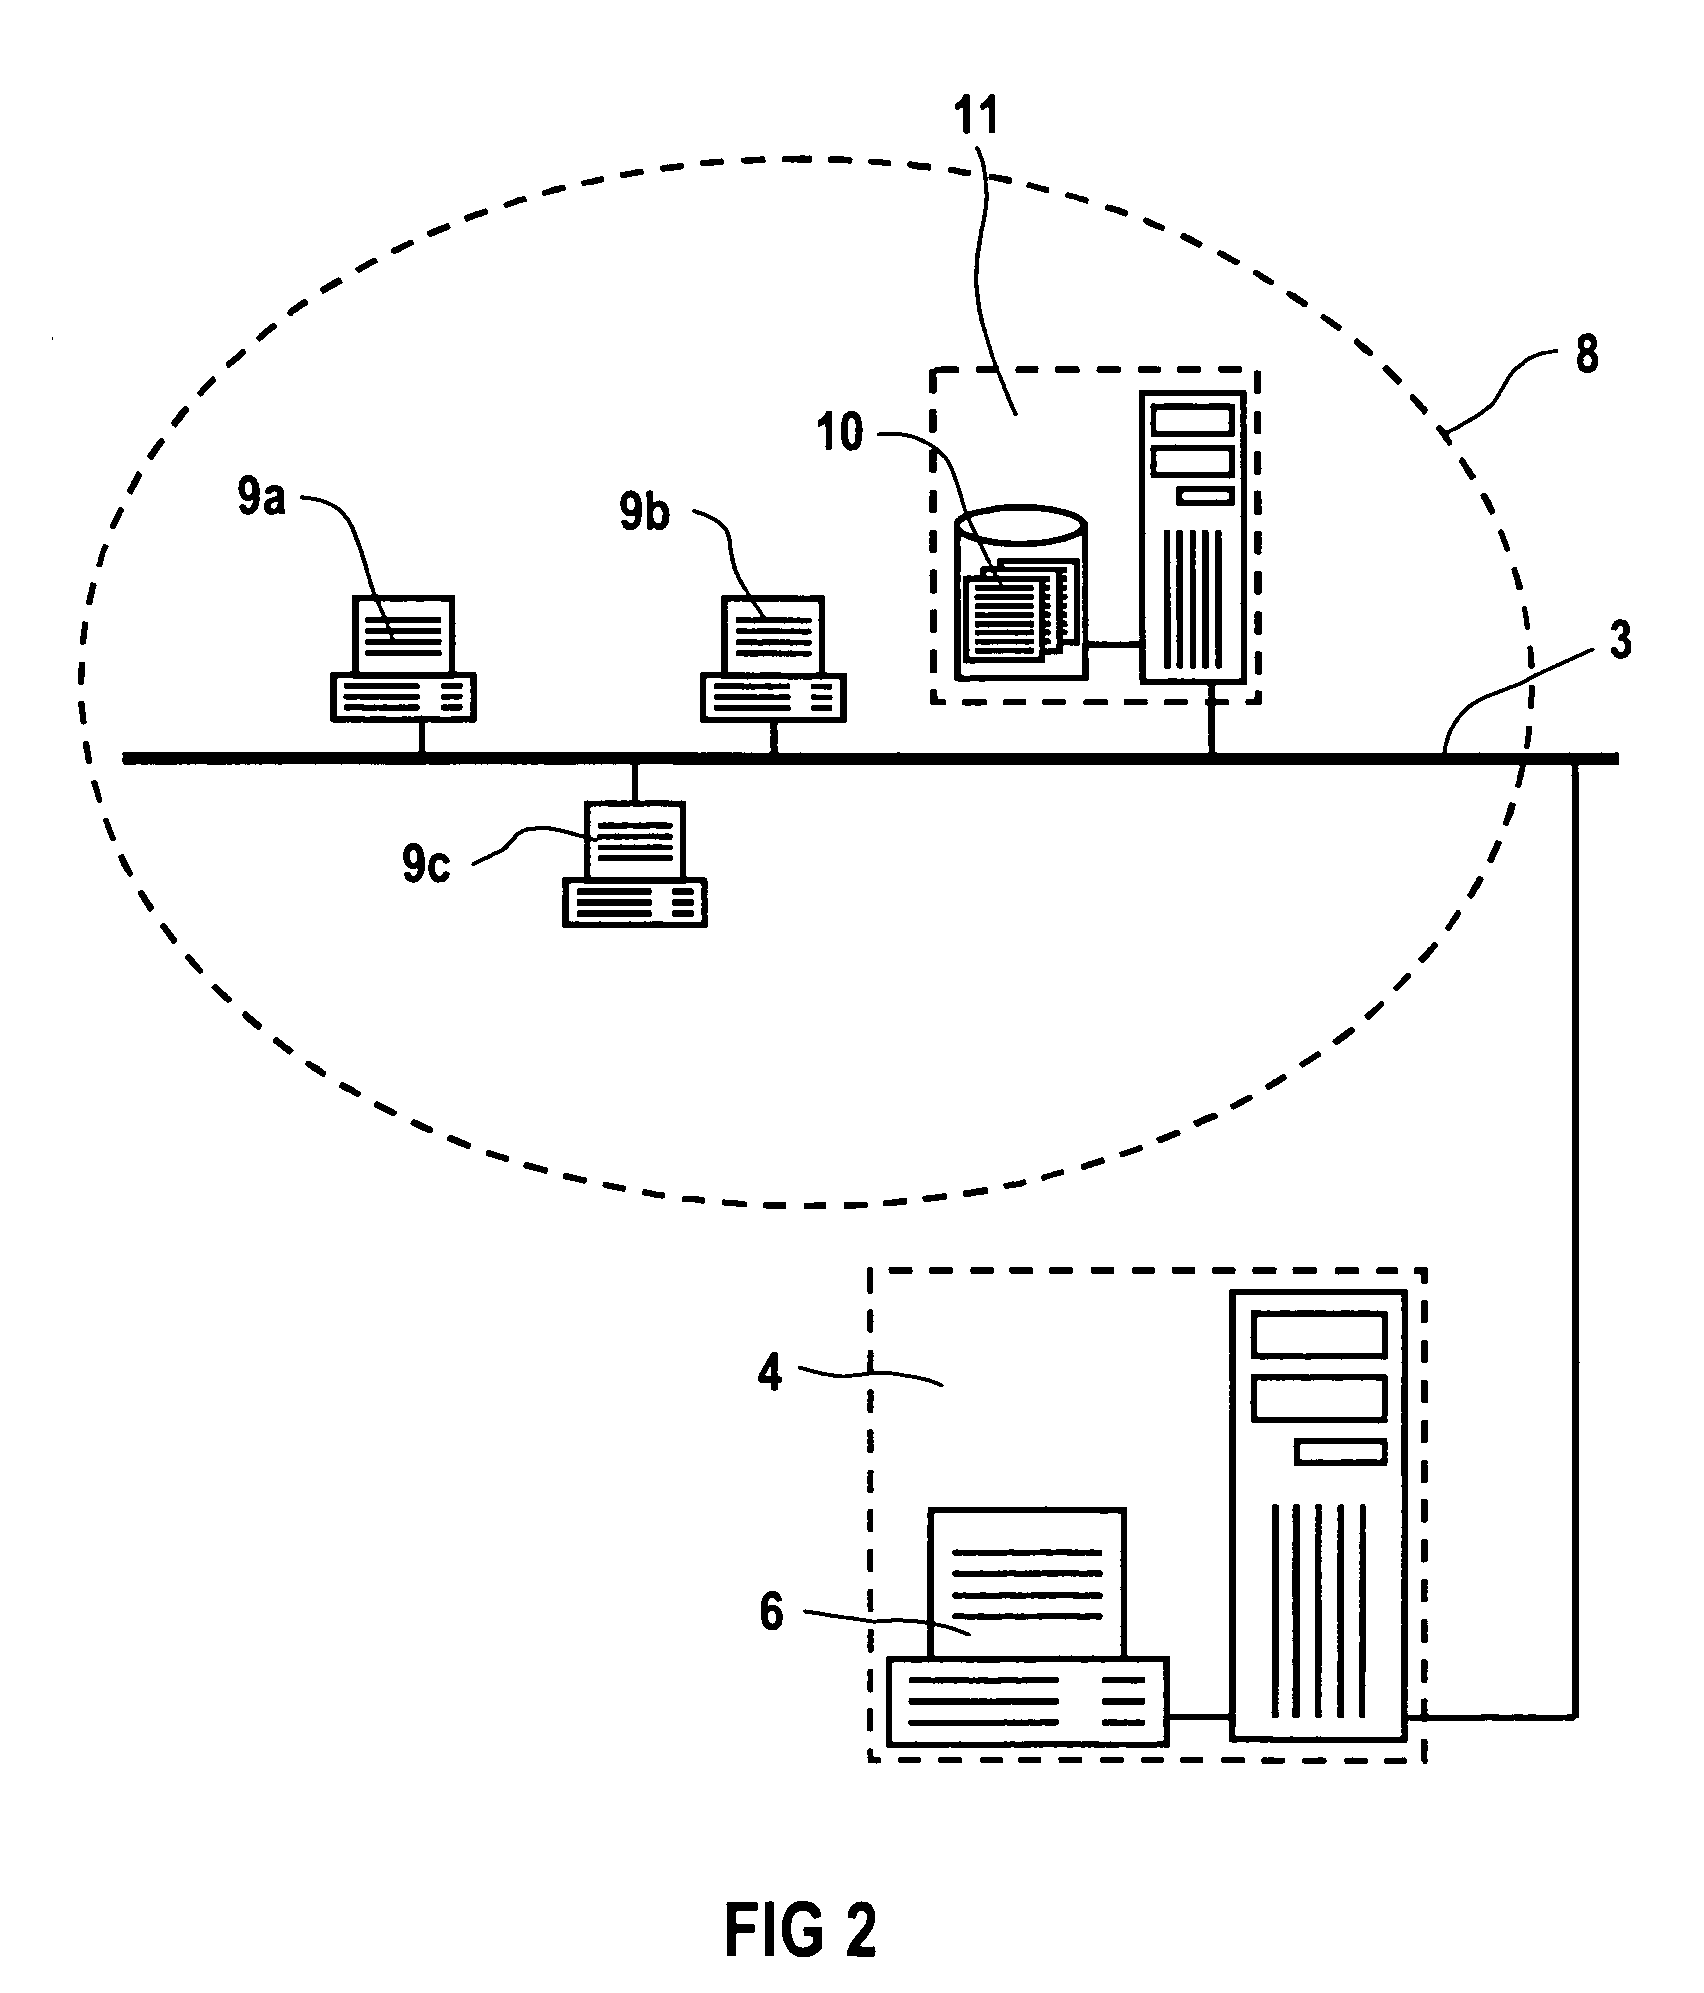 Method and device for forming groups from subscribers to a communication network